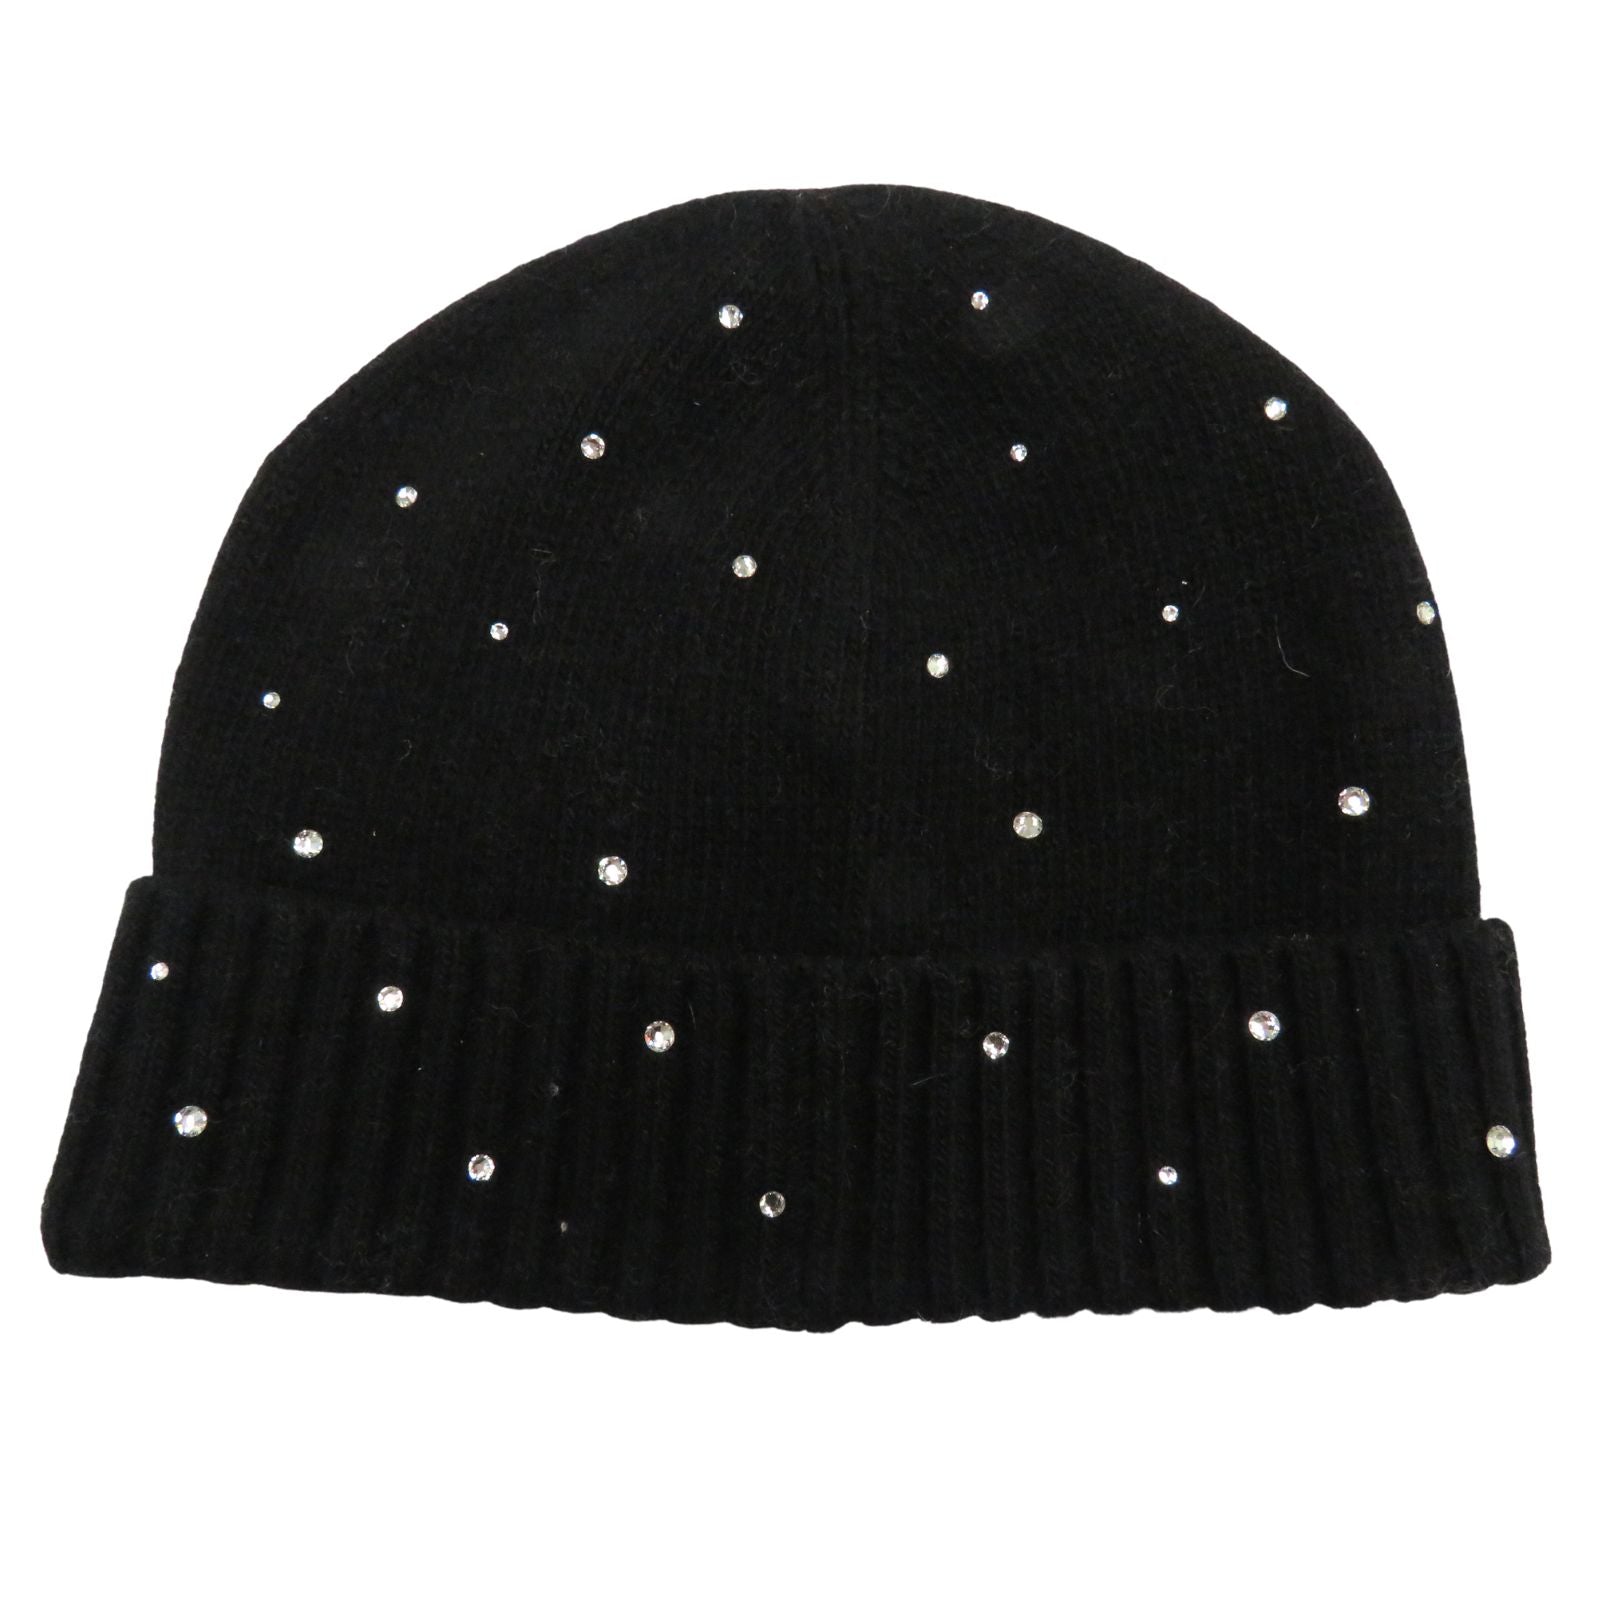 Black Cashmere Hat With Scattered Crystals